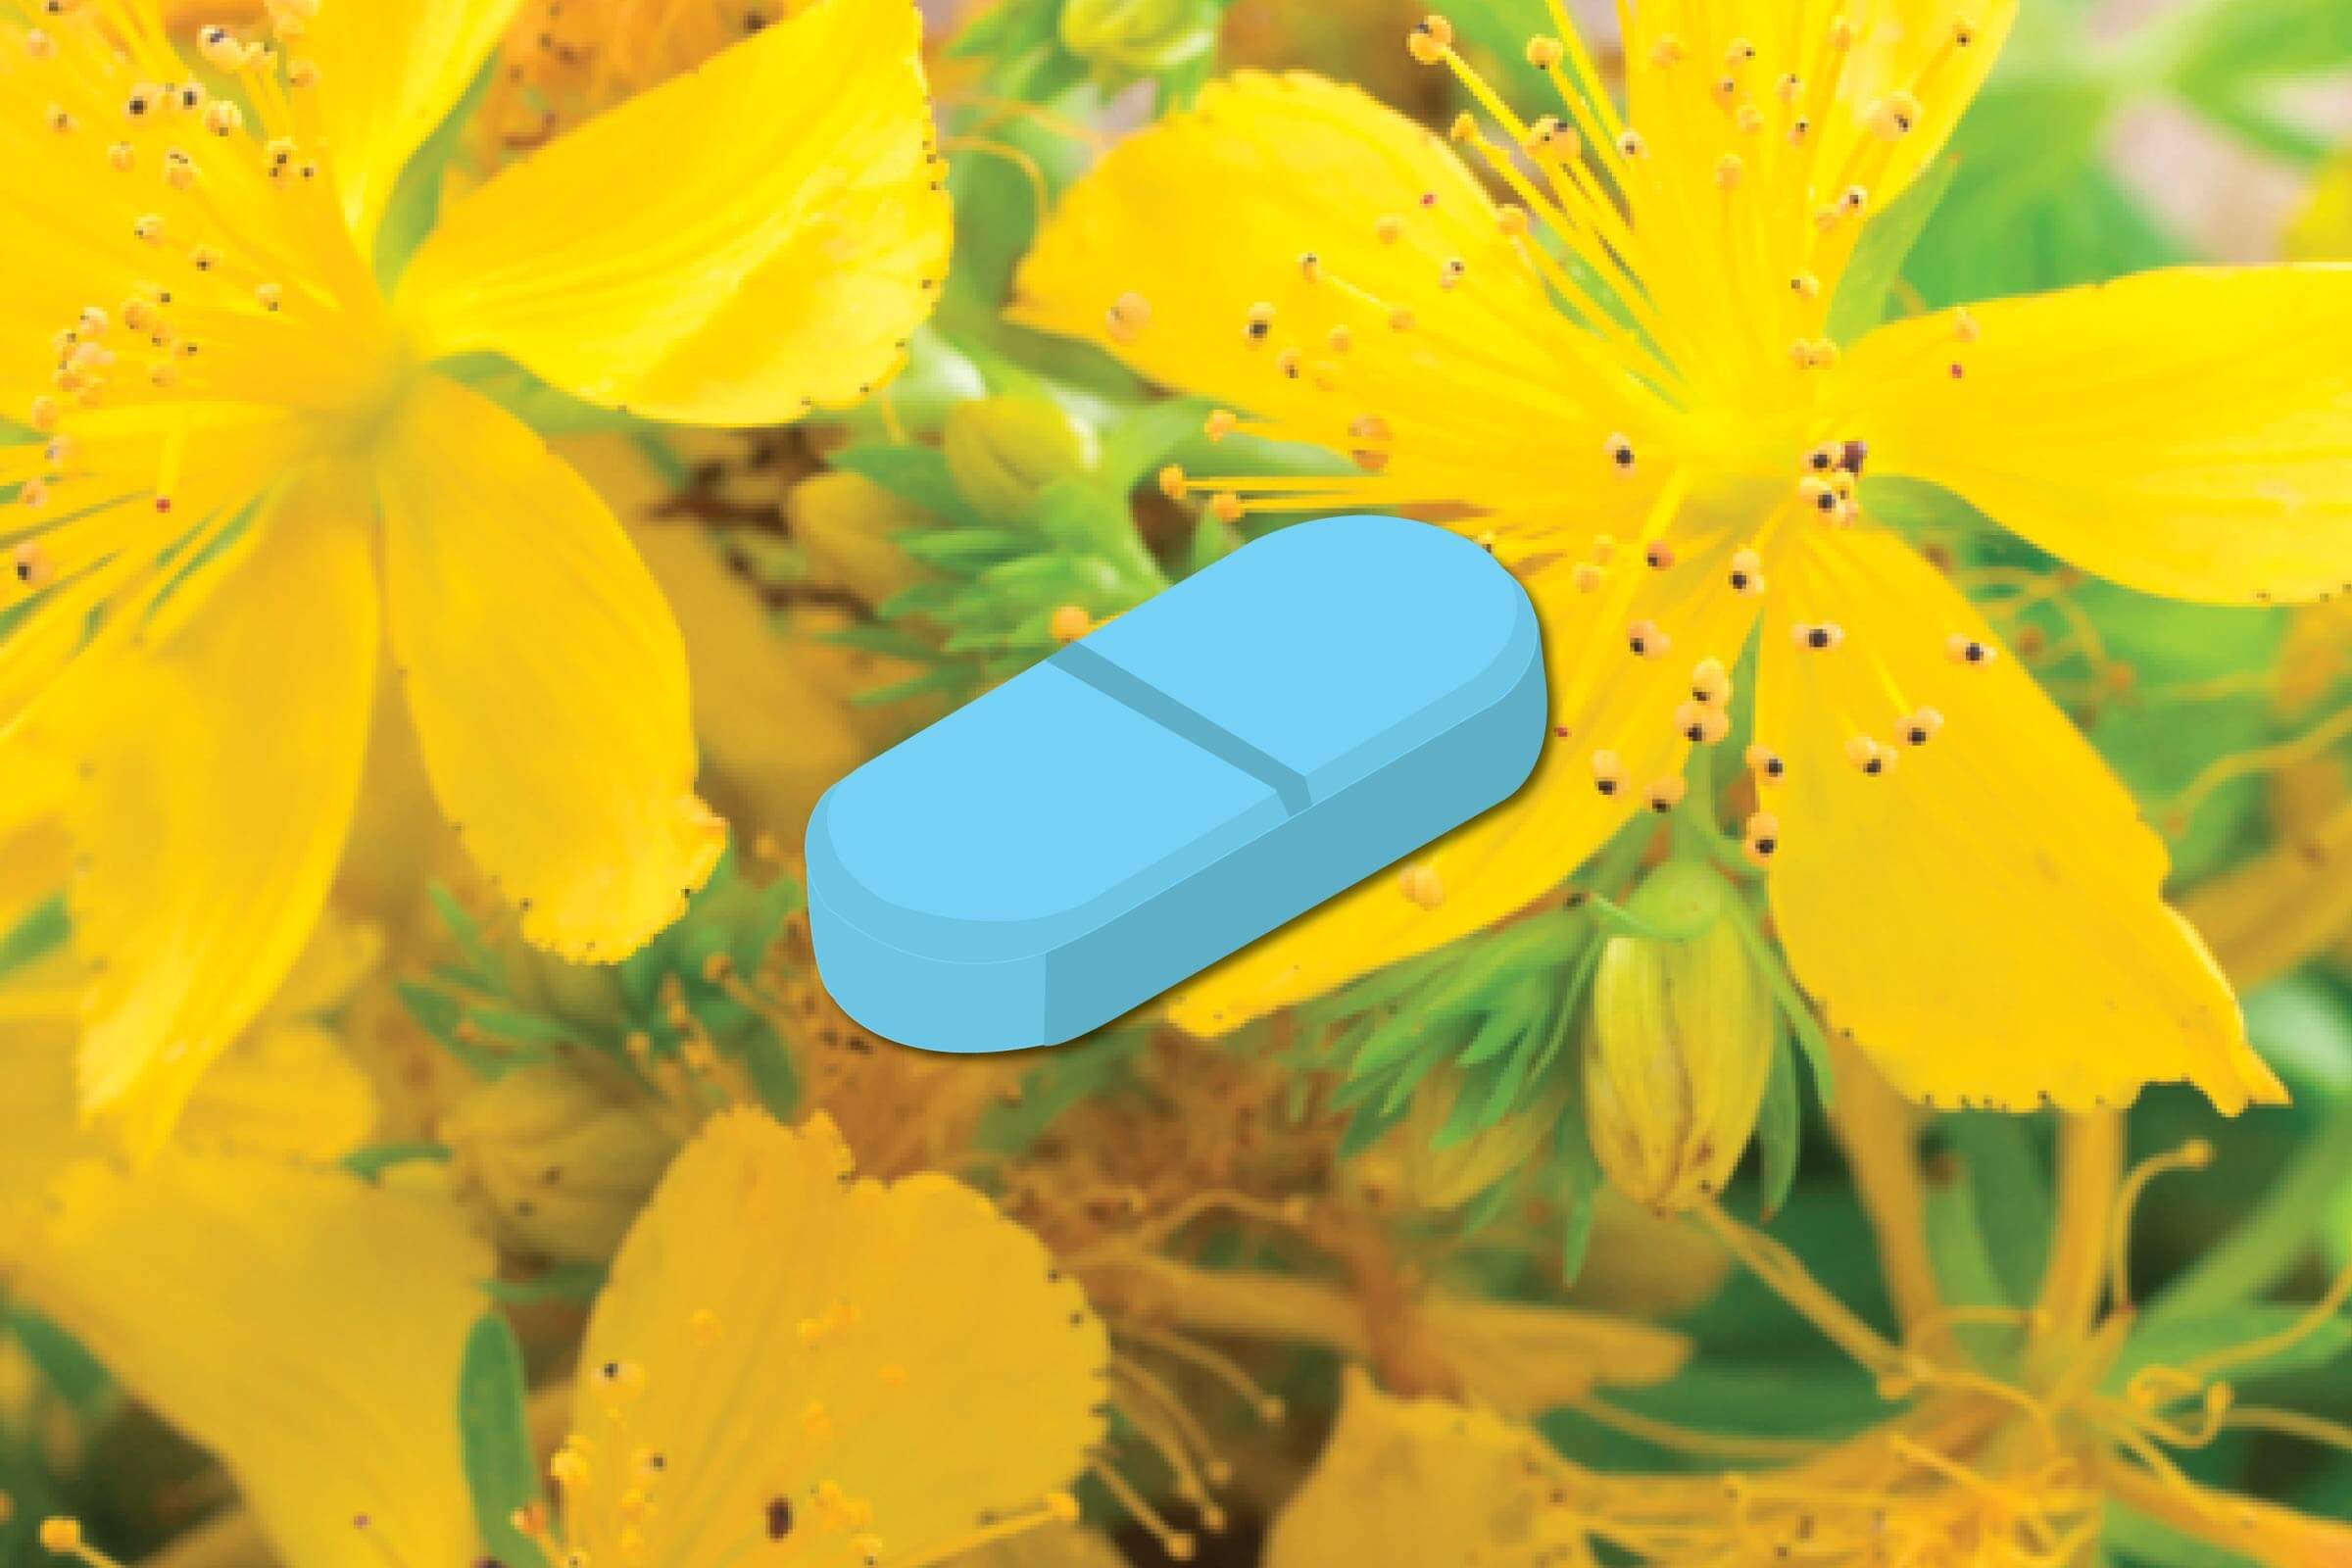 Illustration of St. John's wort supplement against a background of the flowering plant from which it is derived.